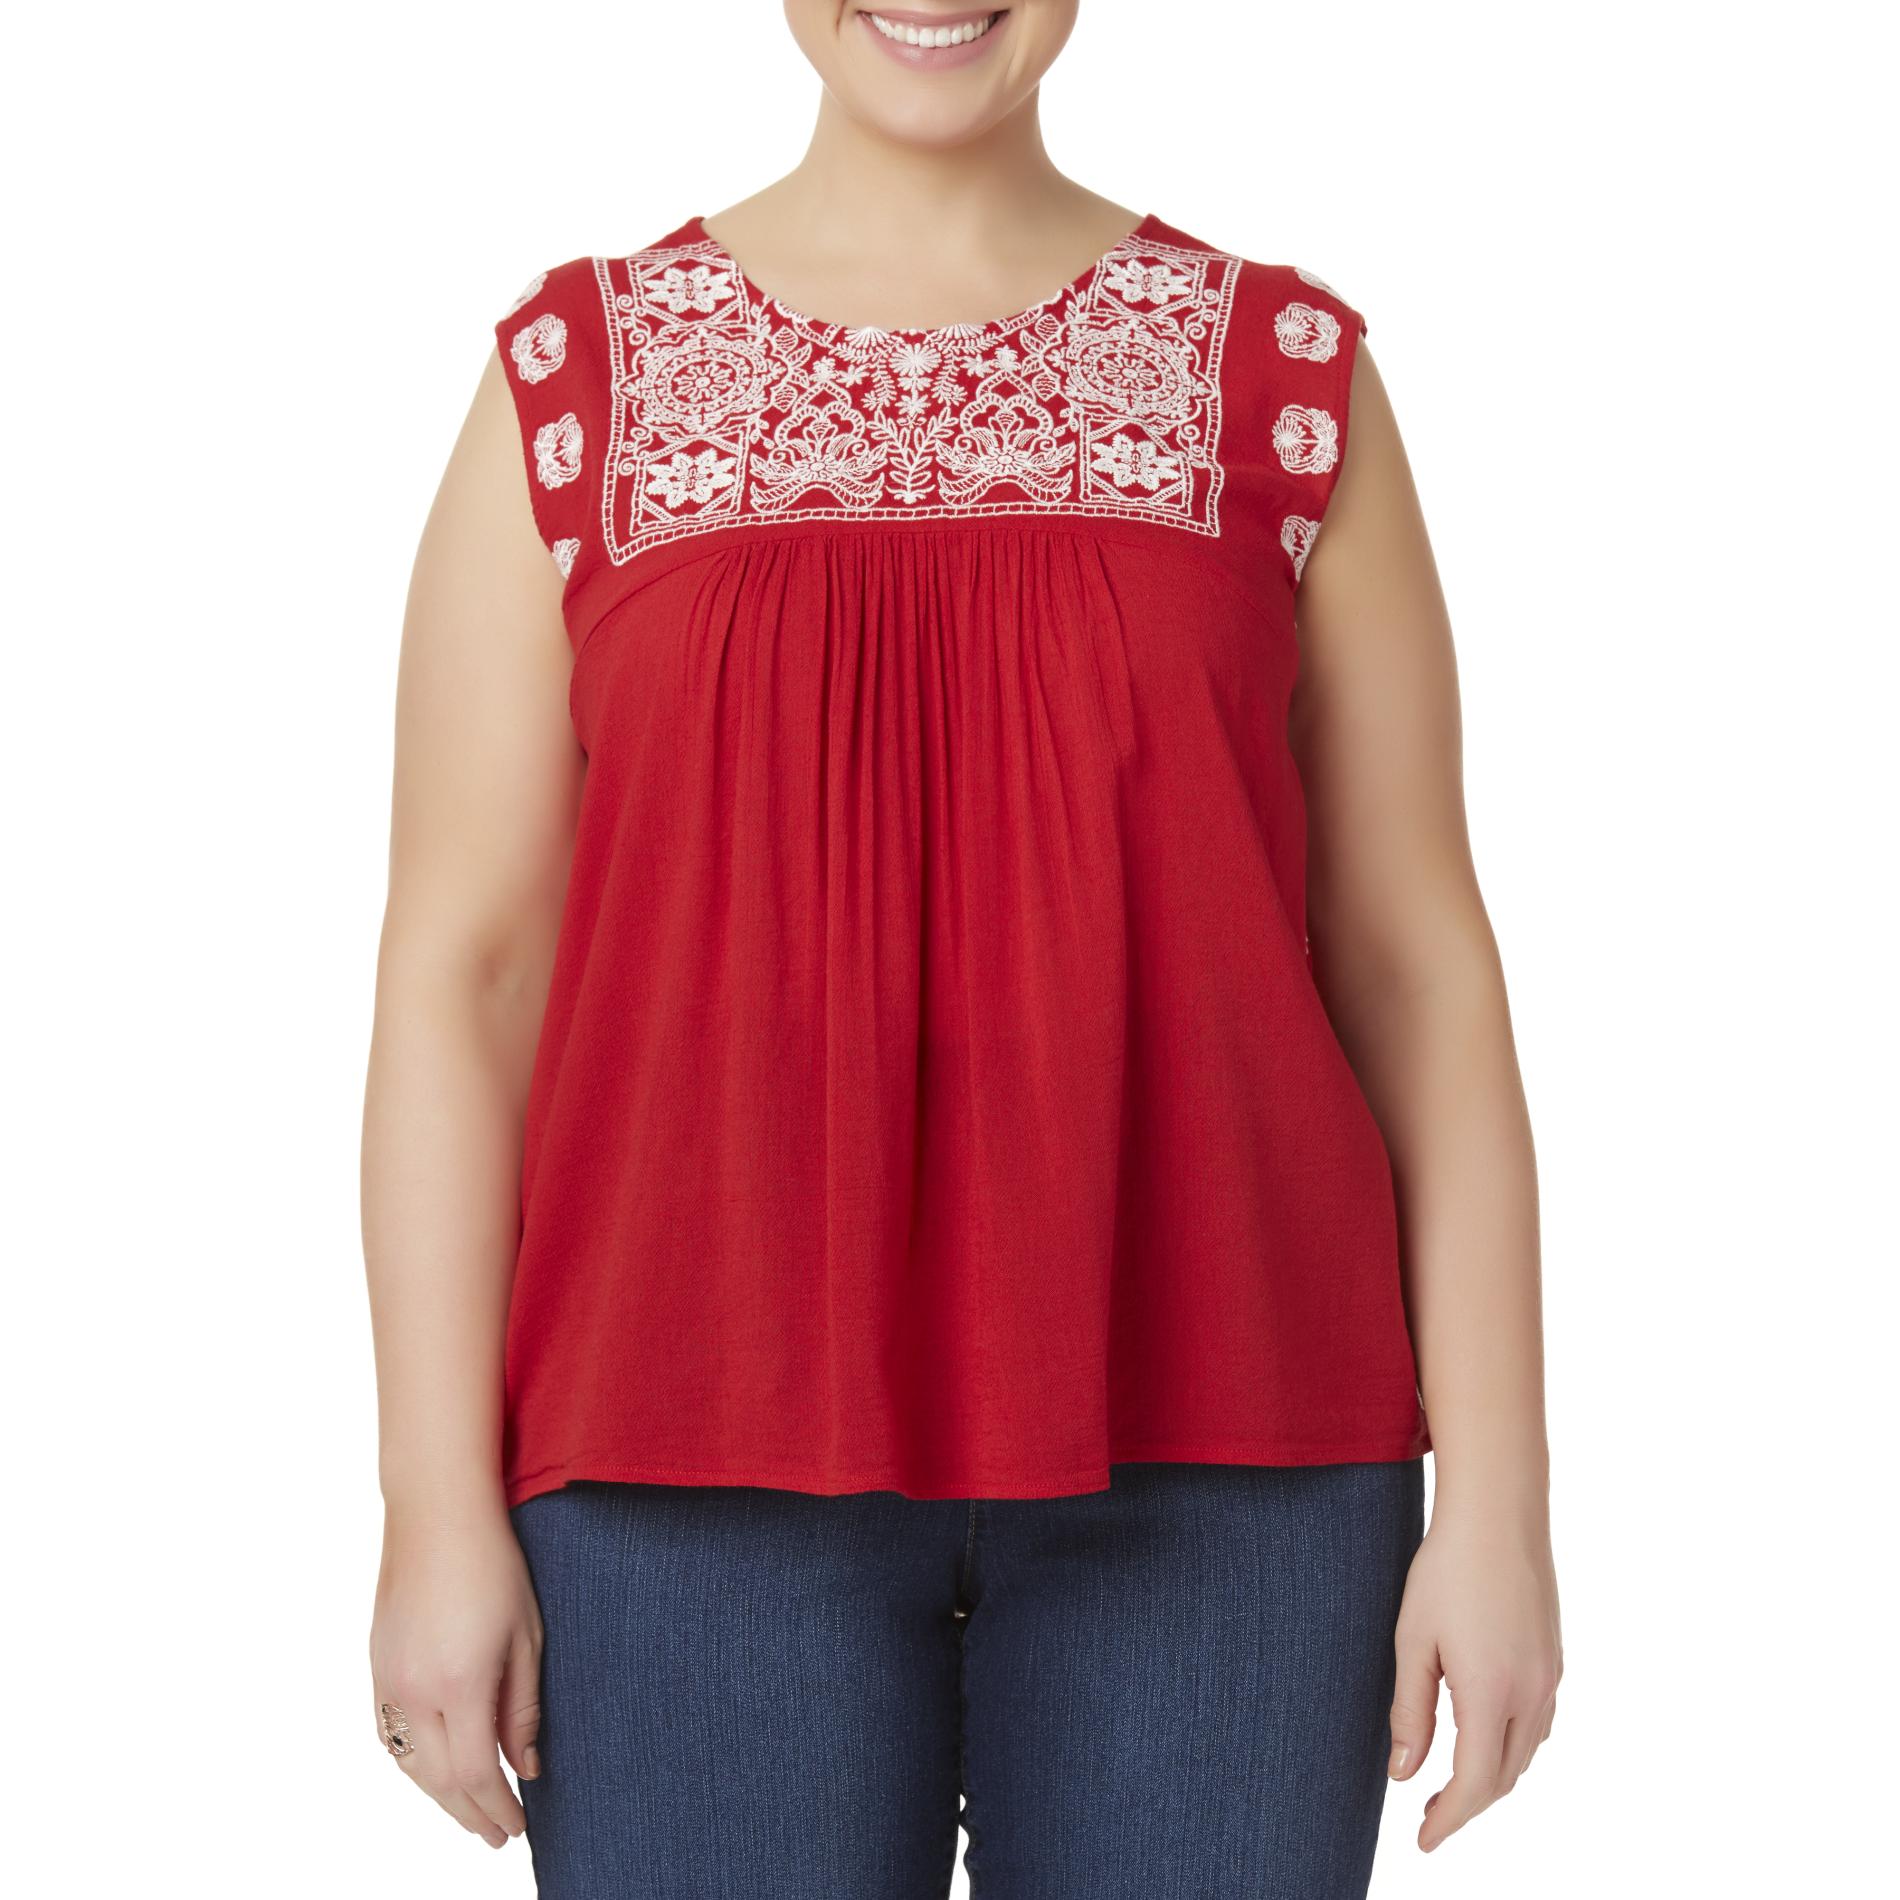 Simply Emma Women's Plus Embroidered Sleeveless Top